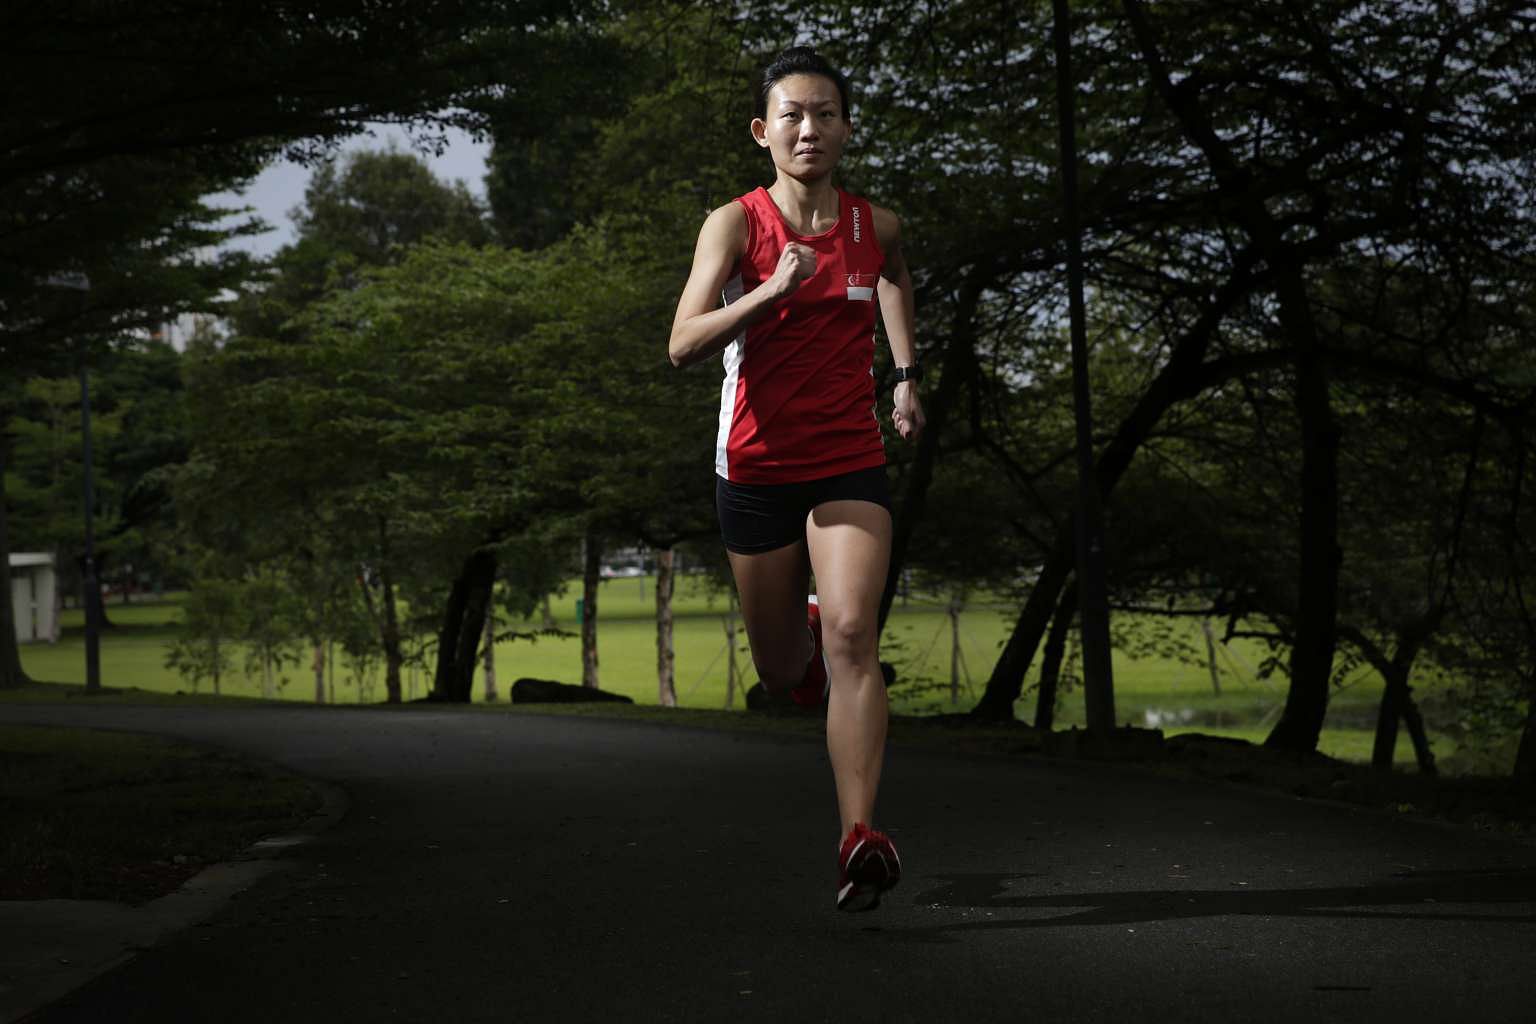 Neo Jie Shi, a marathoner for the Olympic Games, runs in a park near Jurong SAFRA where she trains. She is the first female marathoner since Yvonne Danson at the 1996 Atlanta Games.